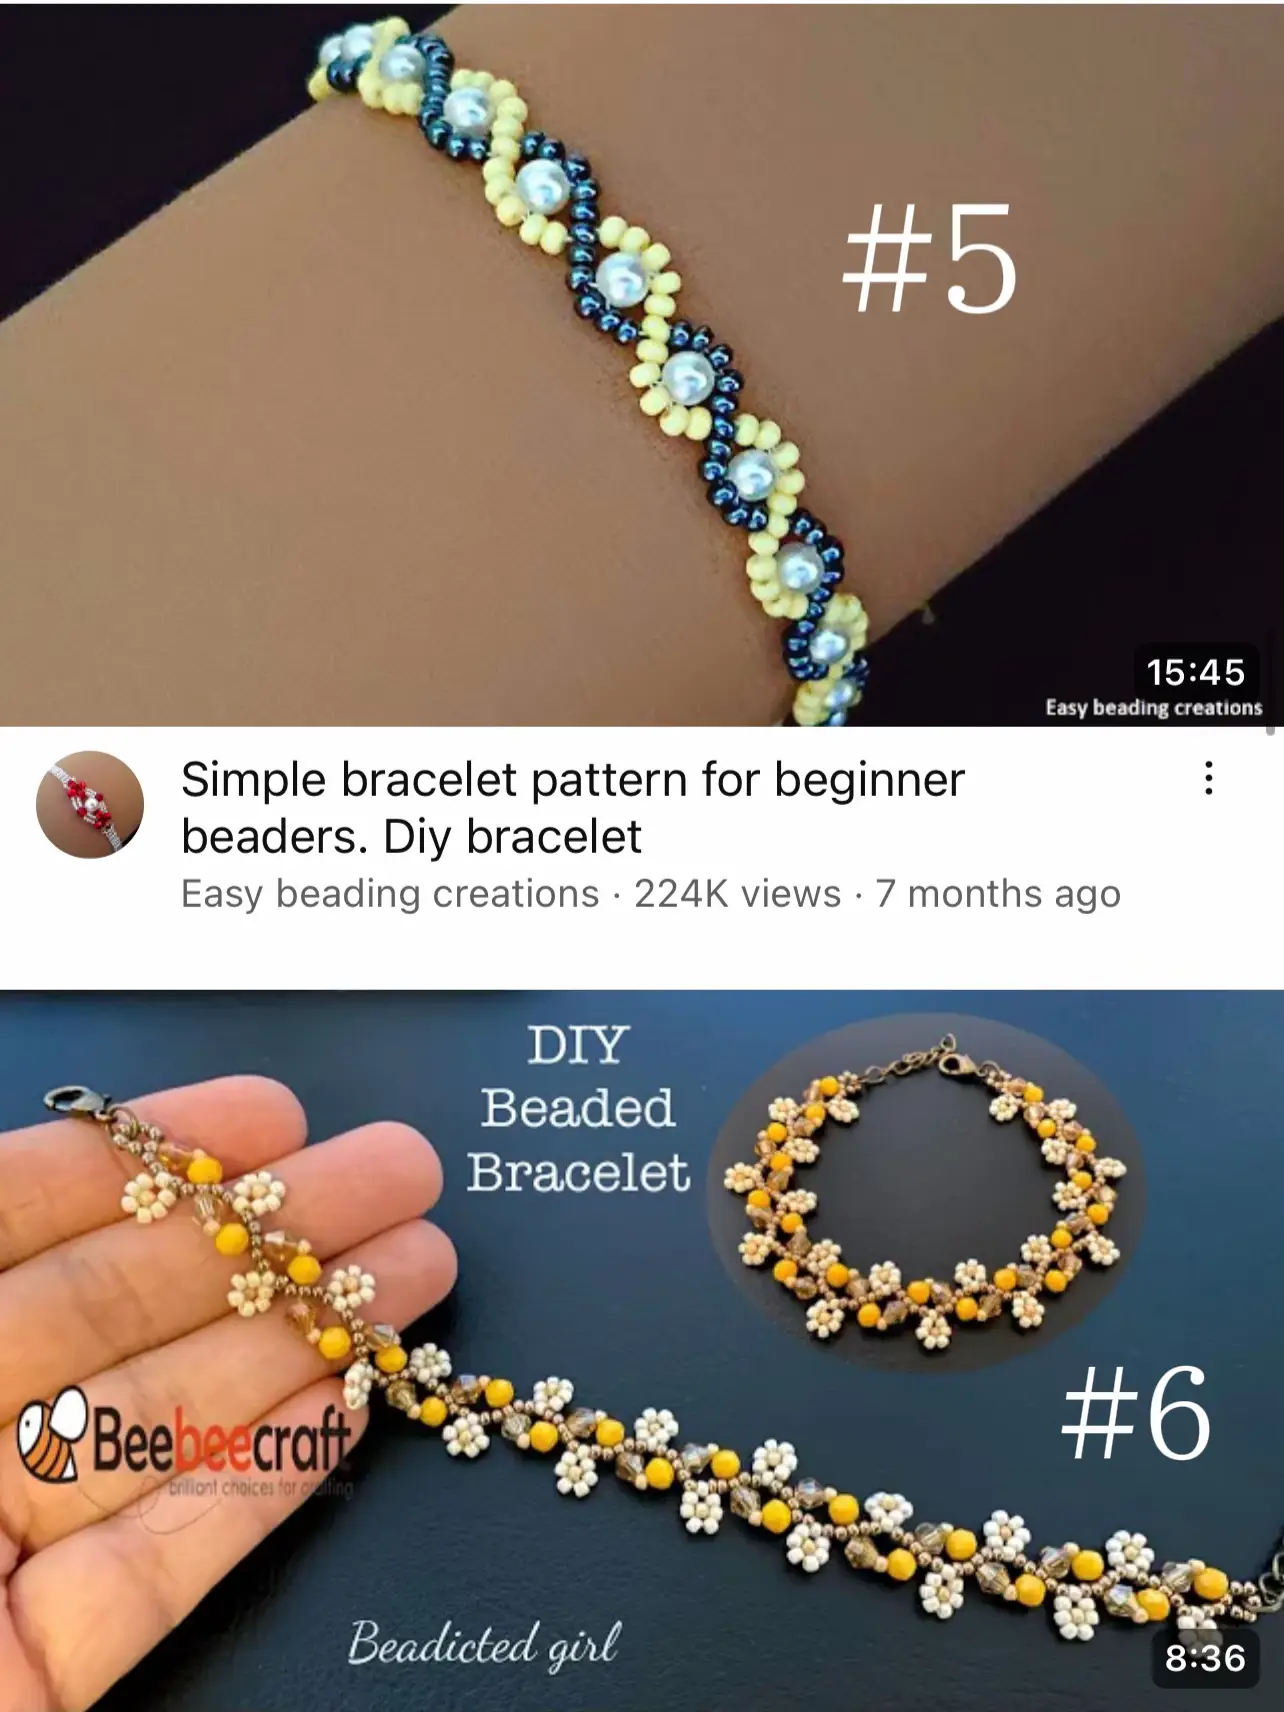 Beaded jewellry – Some simple beaded patterns